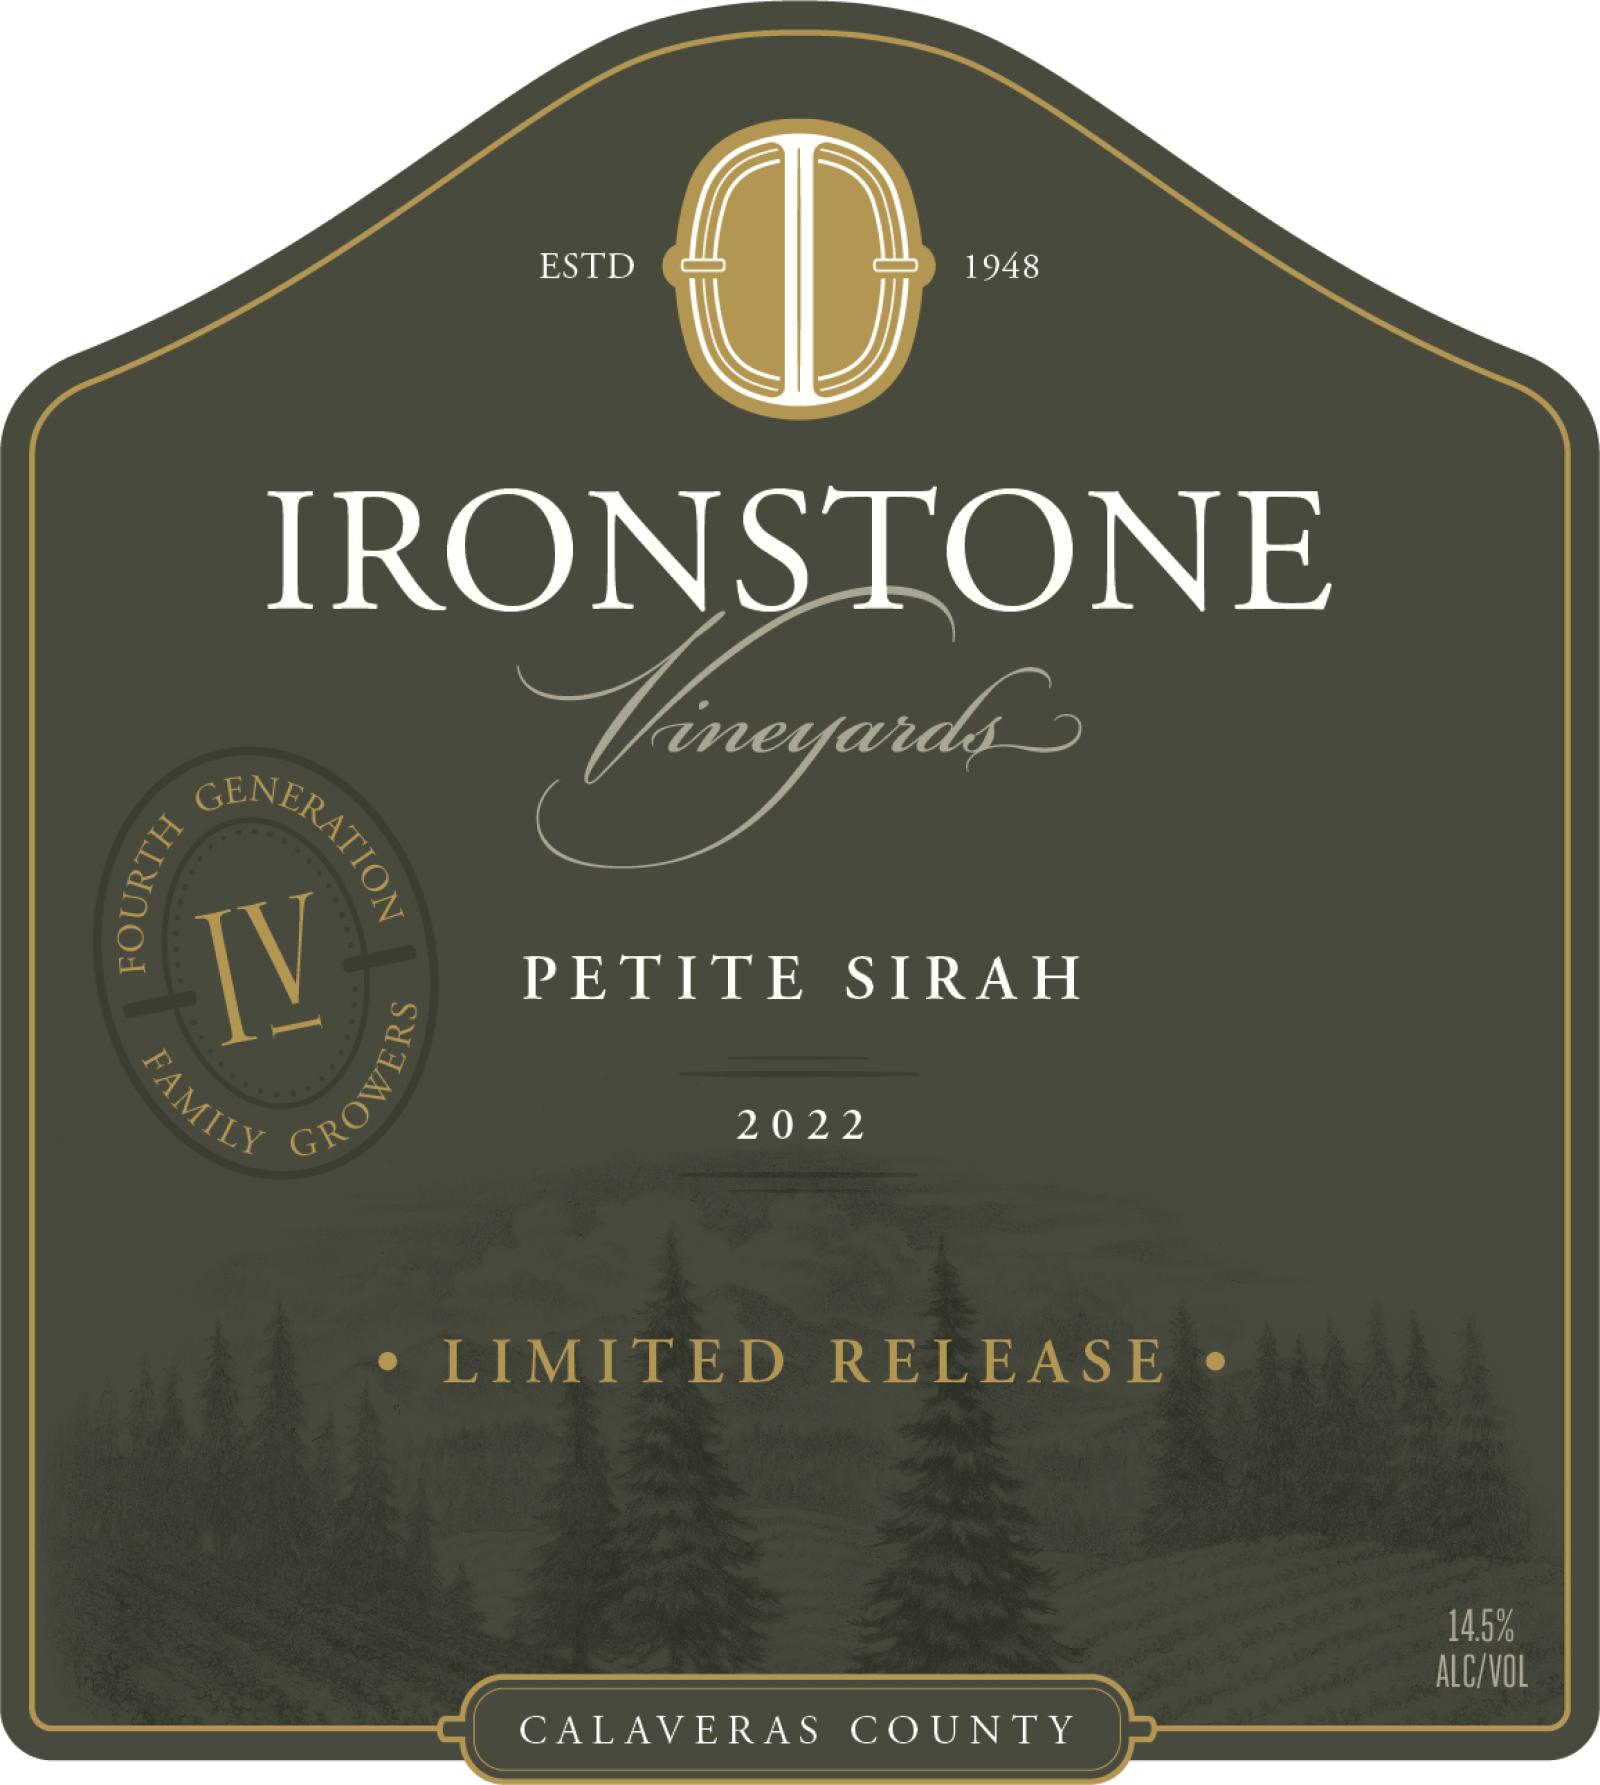 Limited Release Petite Sirah 2022